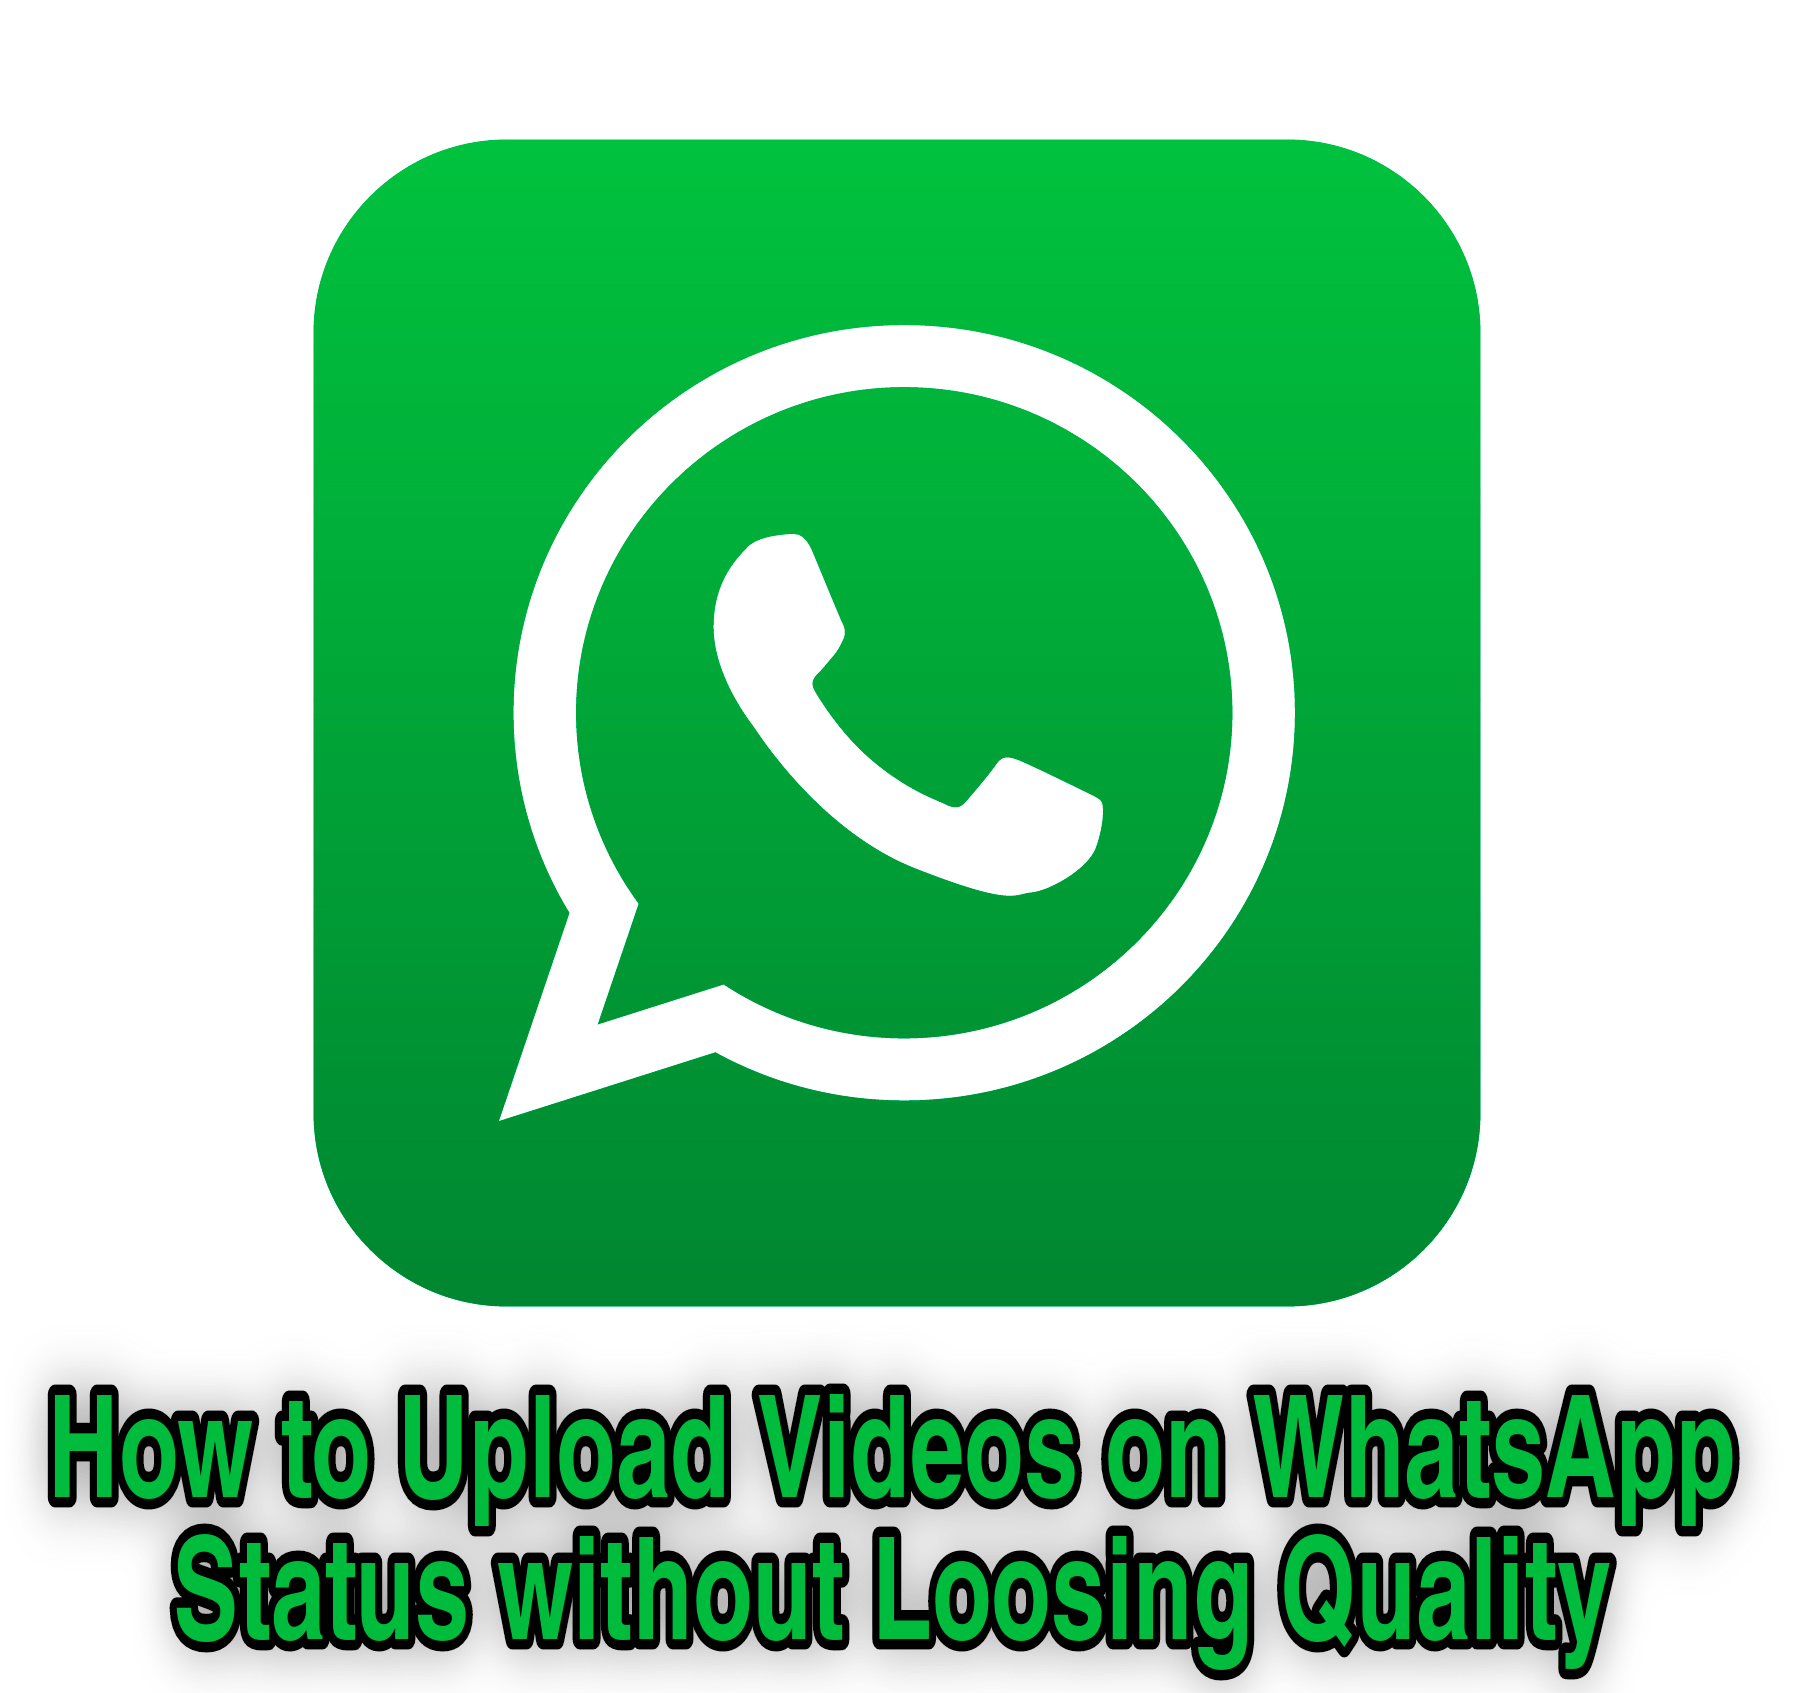 How to Upload Videos on WhatsApp Status without Loosing Quality